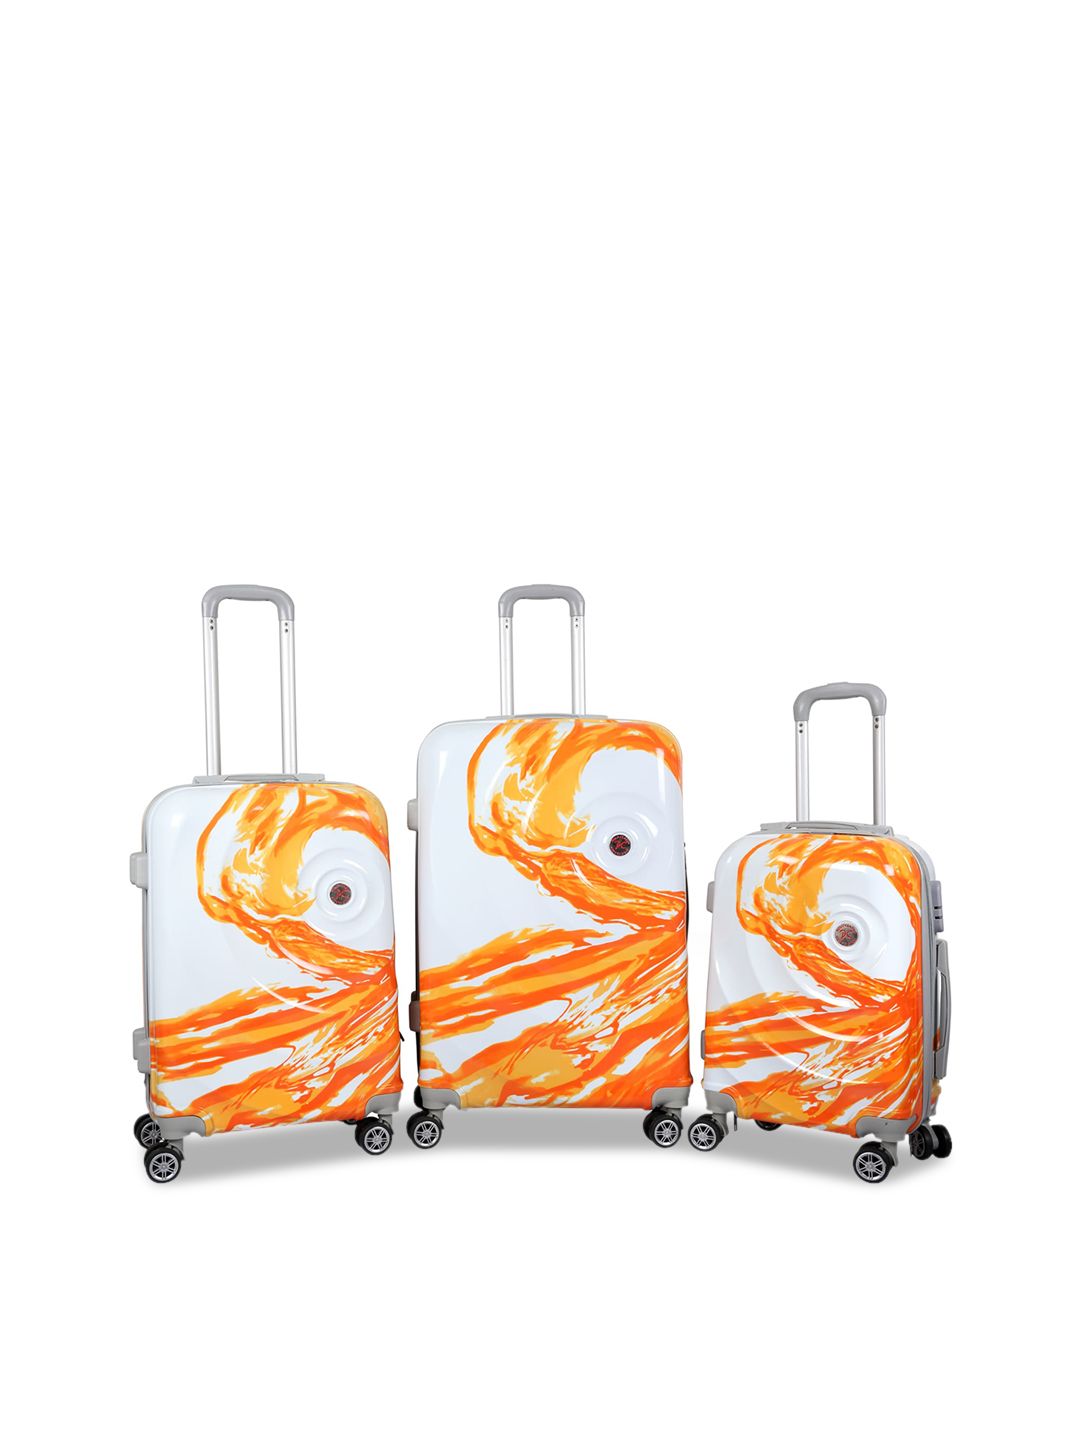 Polo Class Unisex Set of 3 Orange & White Printed Hard Luggage Trolley Bags Price in India